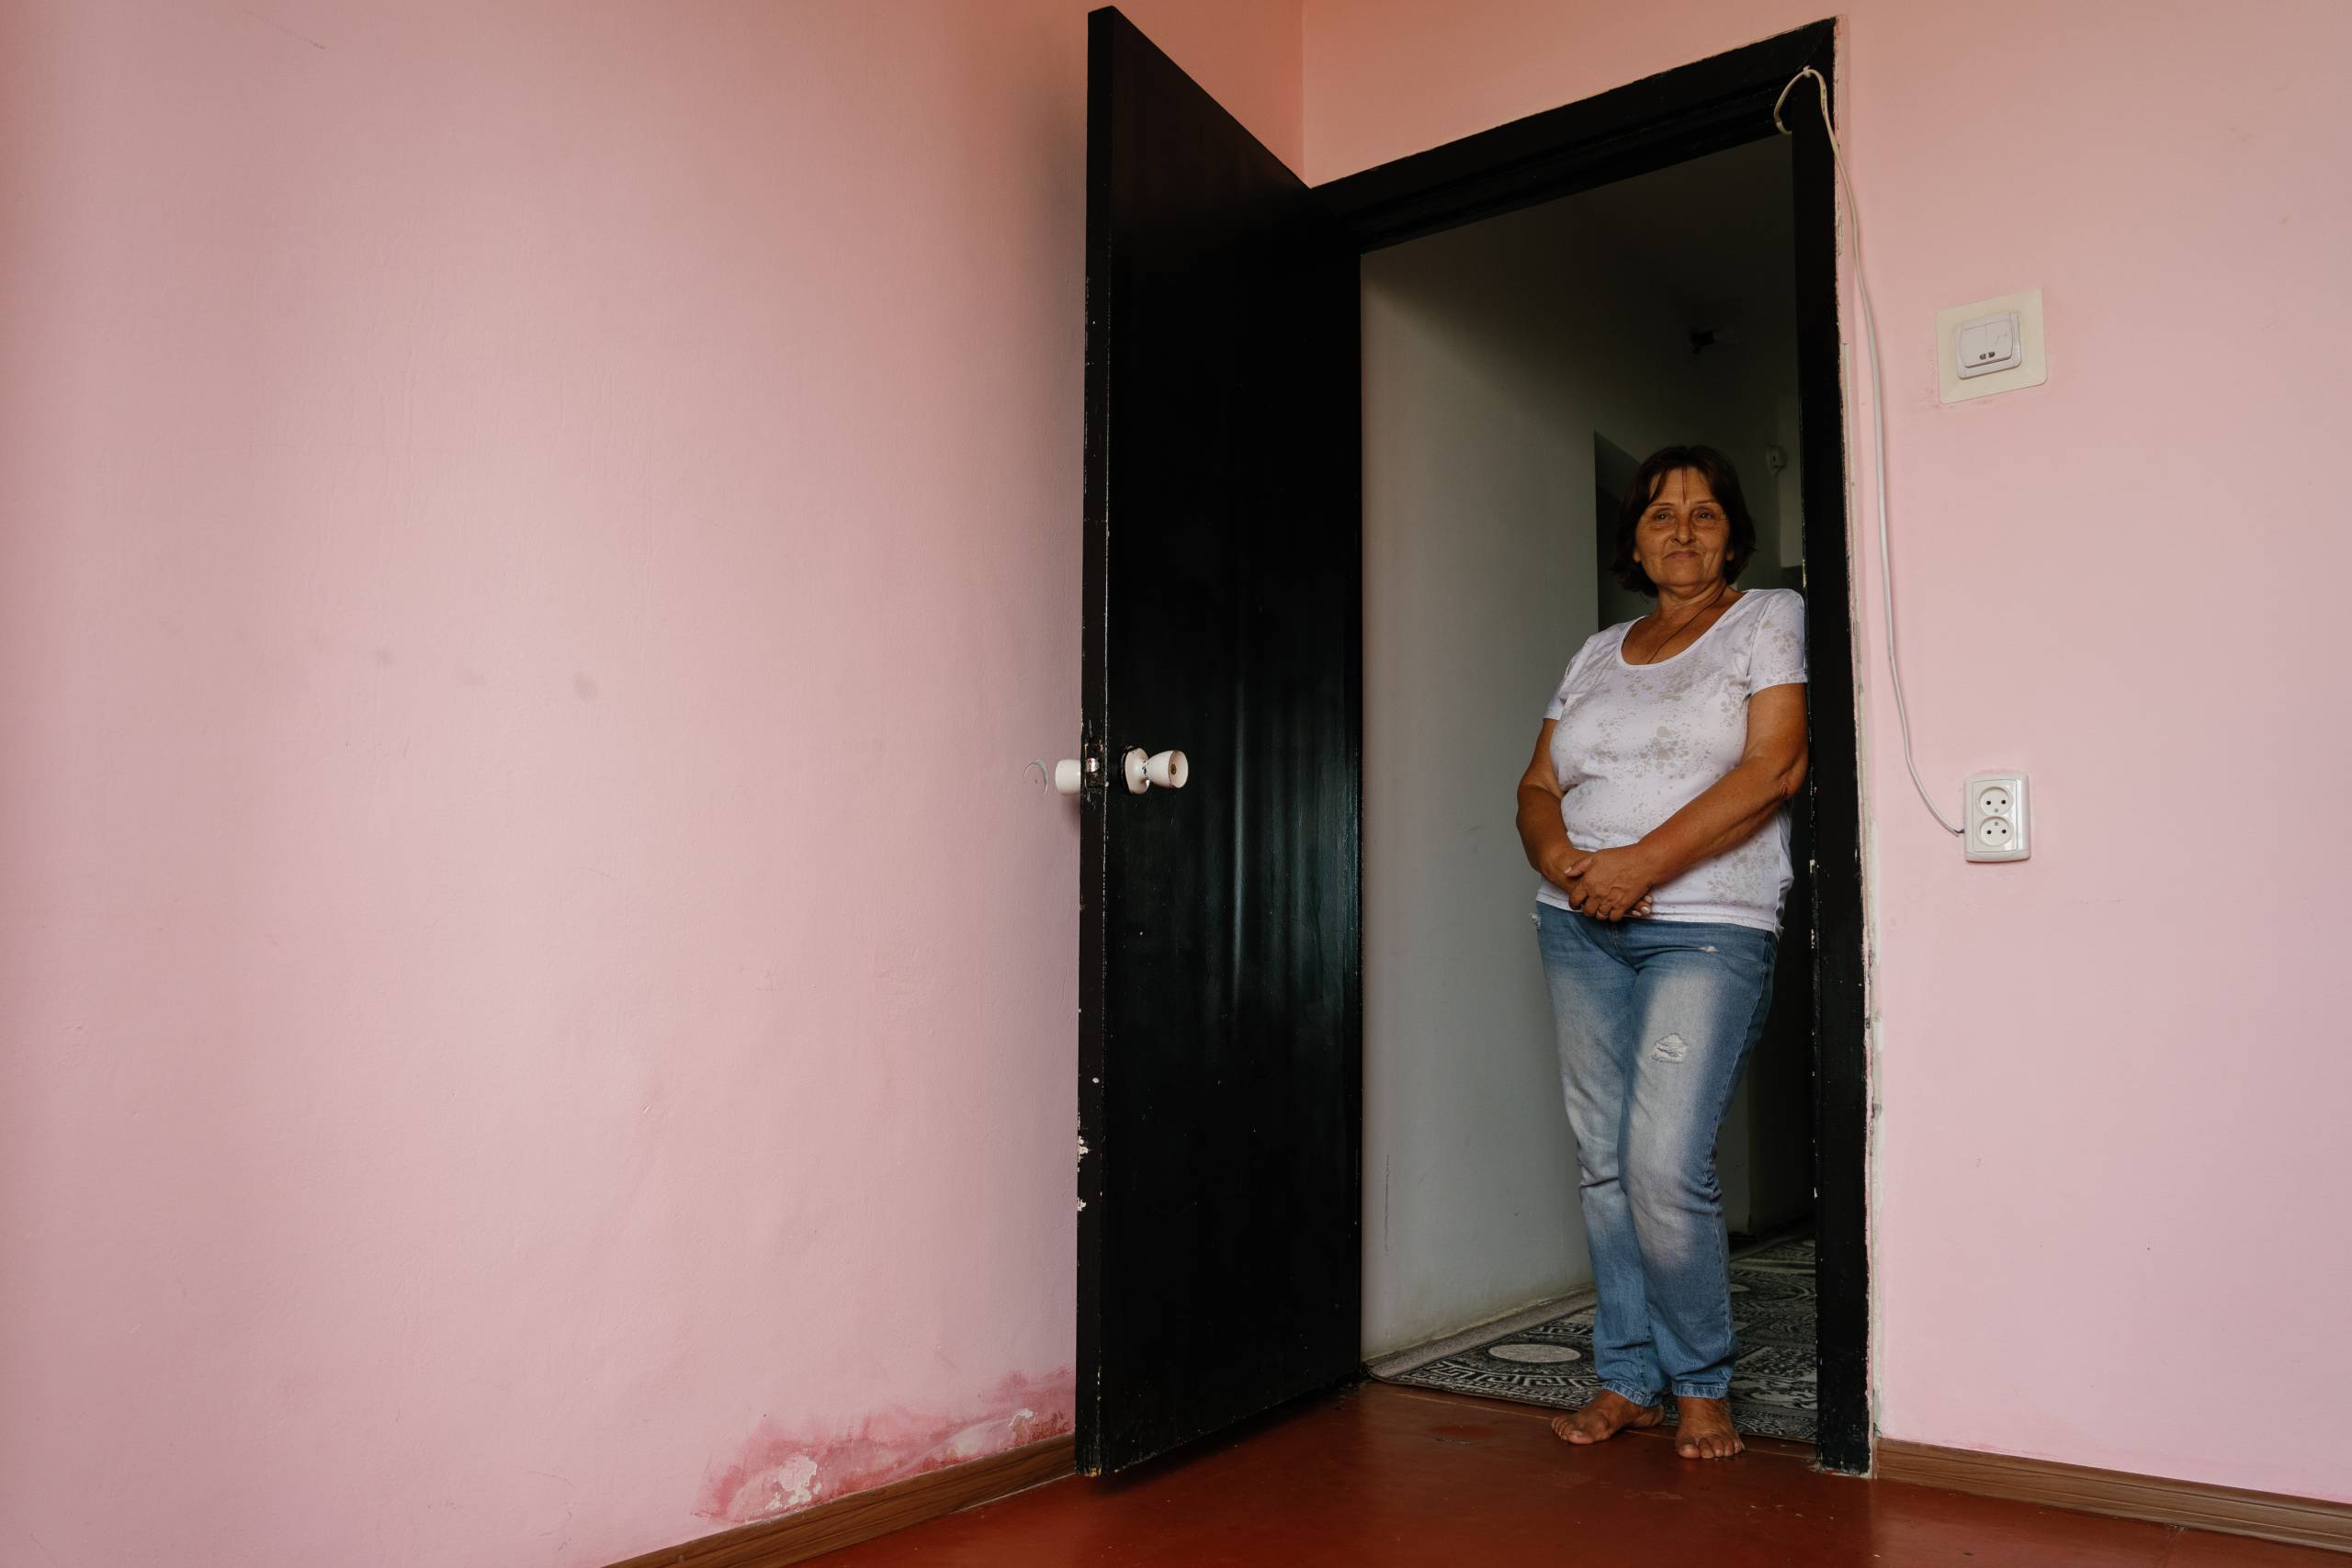 An elderly woman stands in the doorway of a pink room.